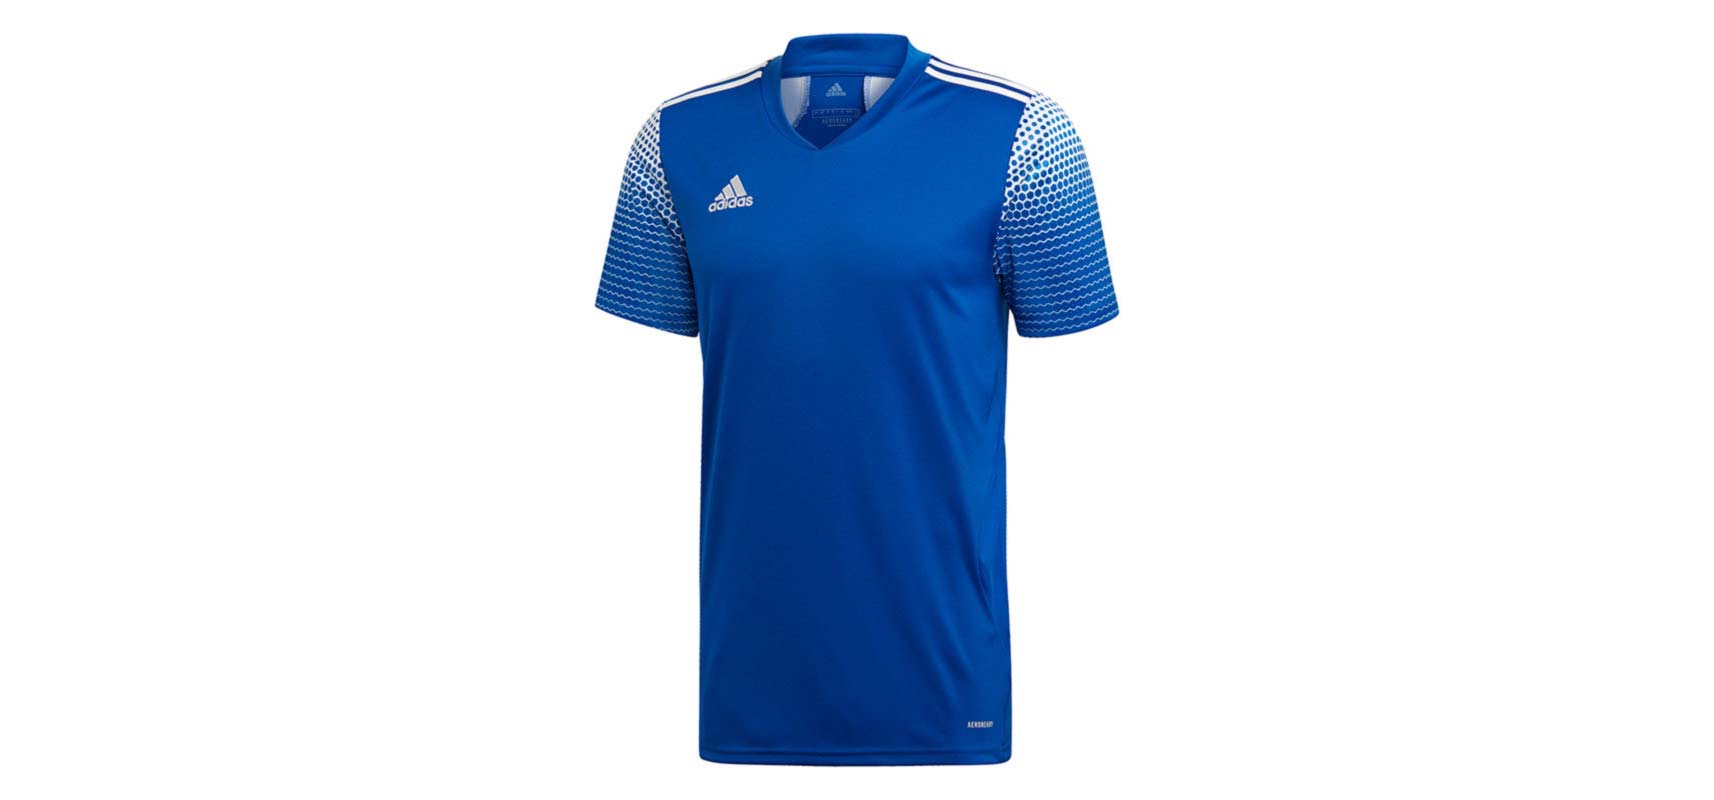 New from adidas for 2020 - Football 